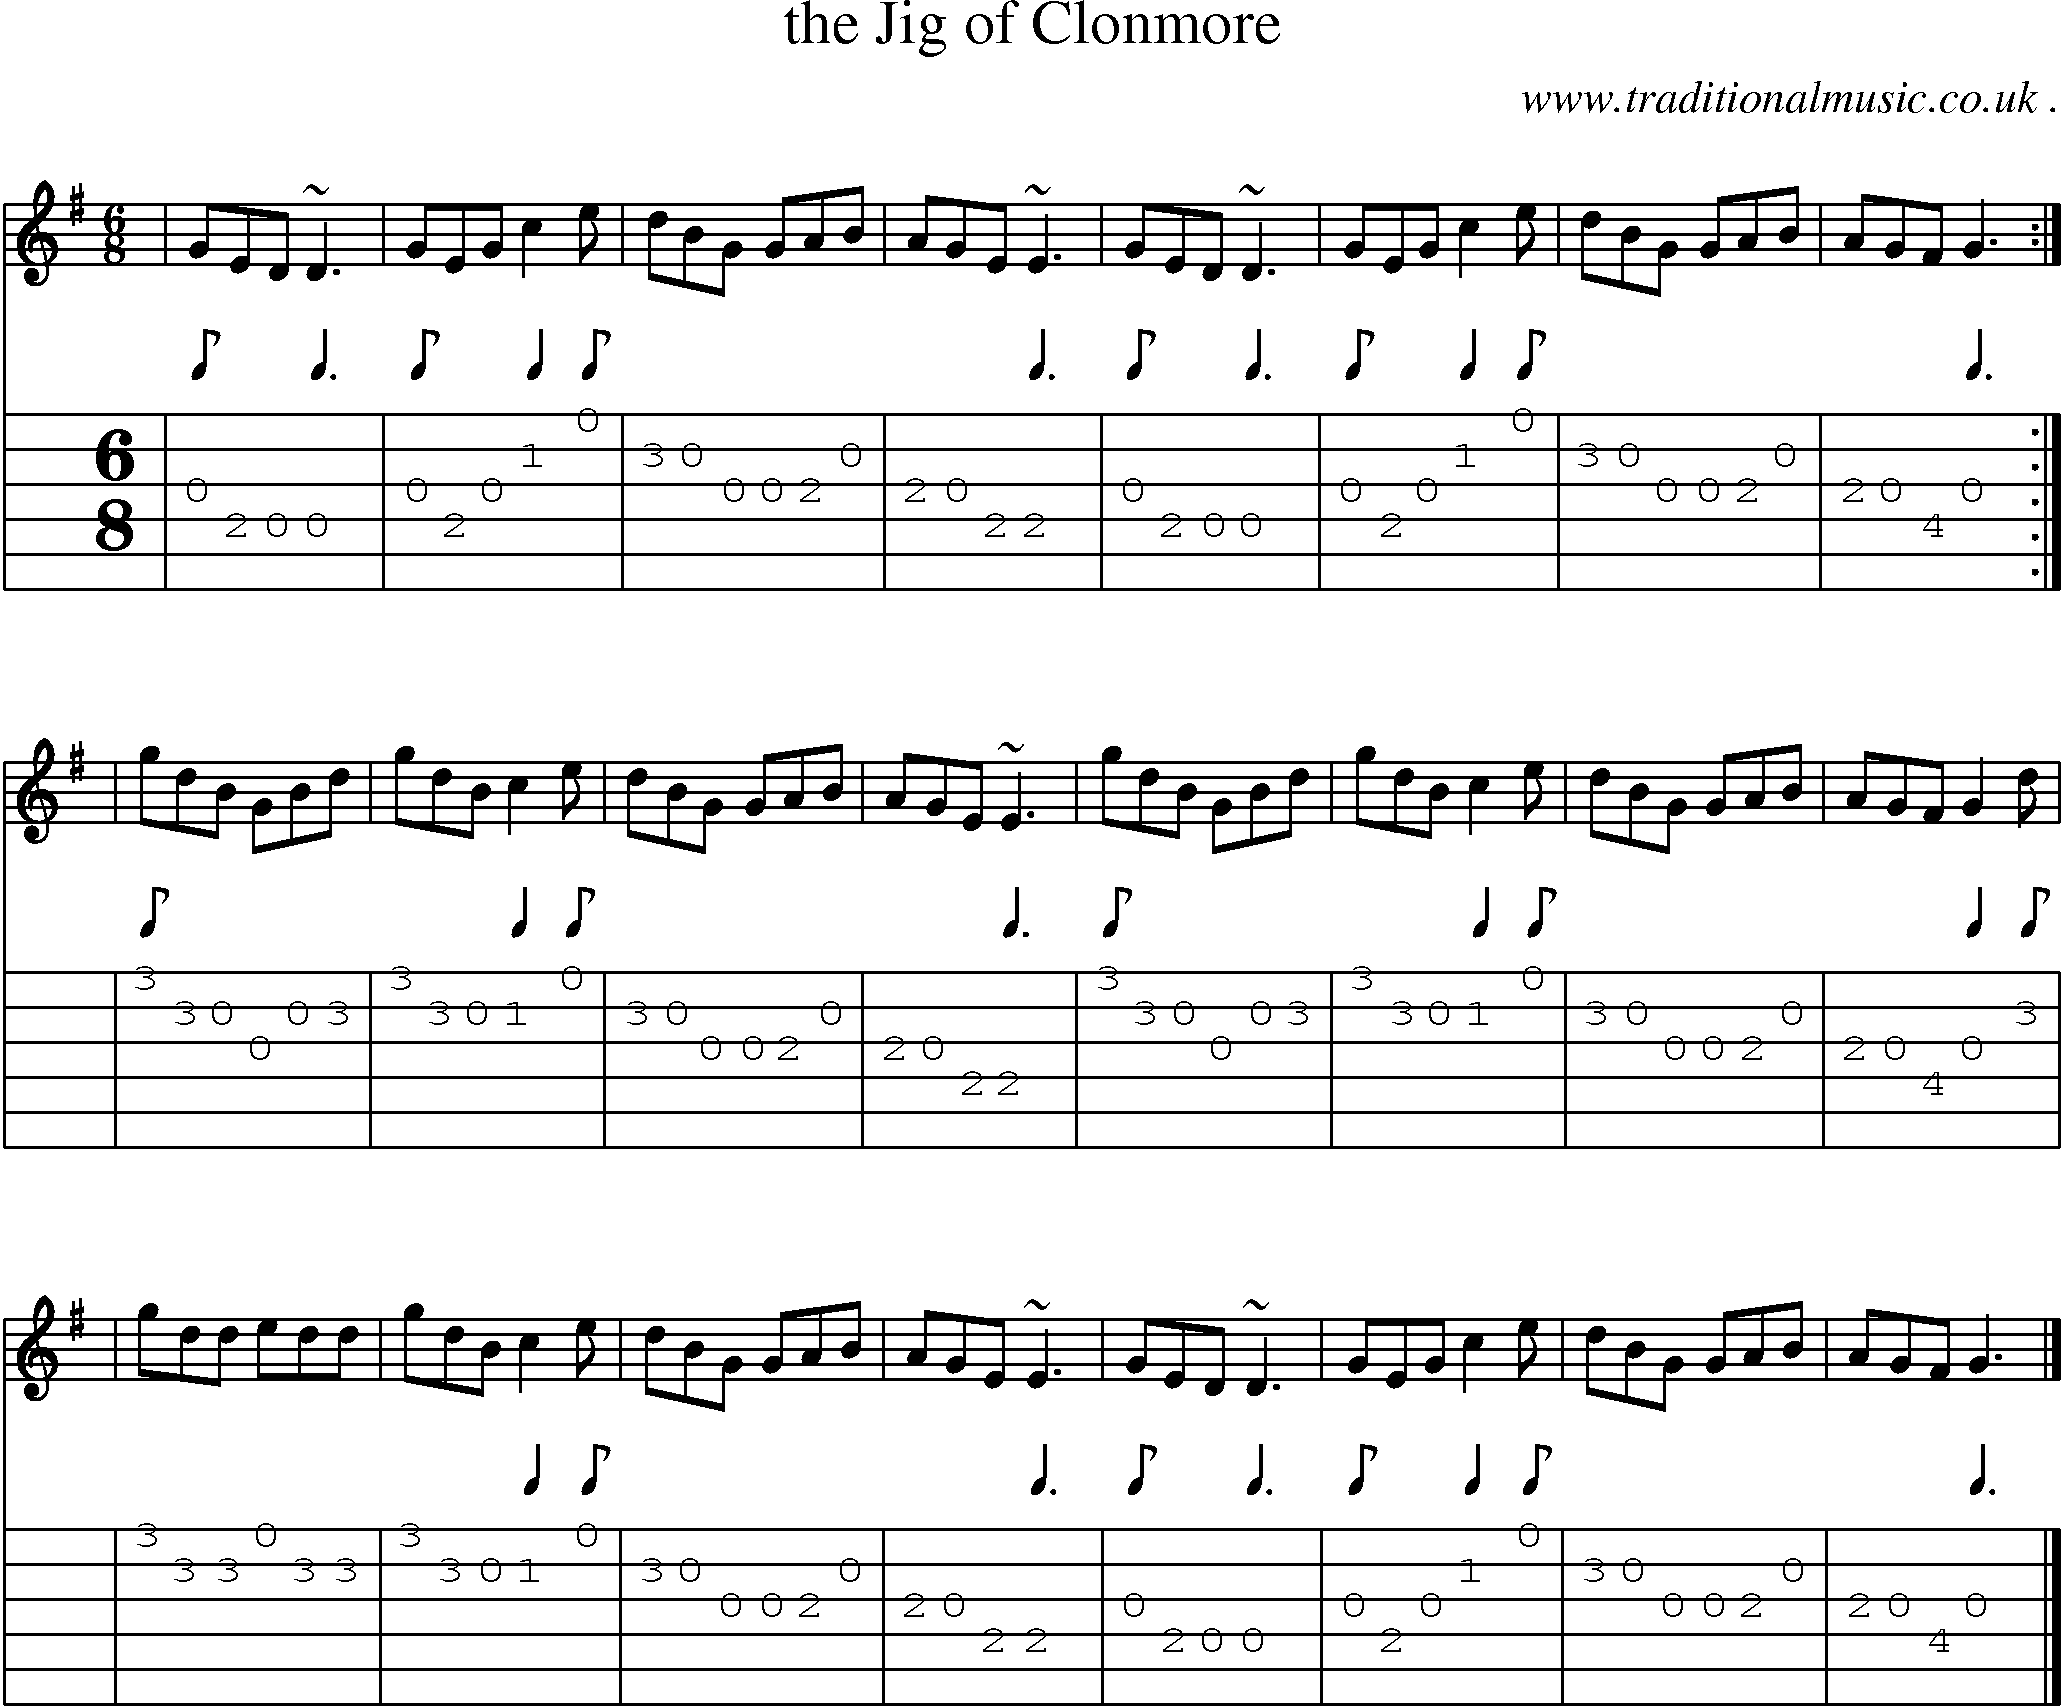 Sheet-music  score, Chords and Guitar Tabs for The Jig Of Clonmore